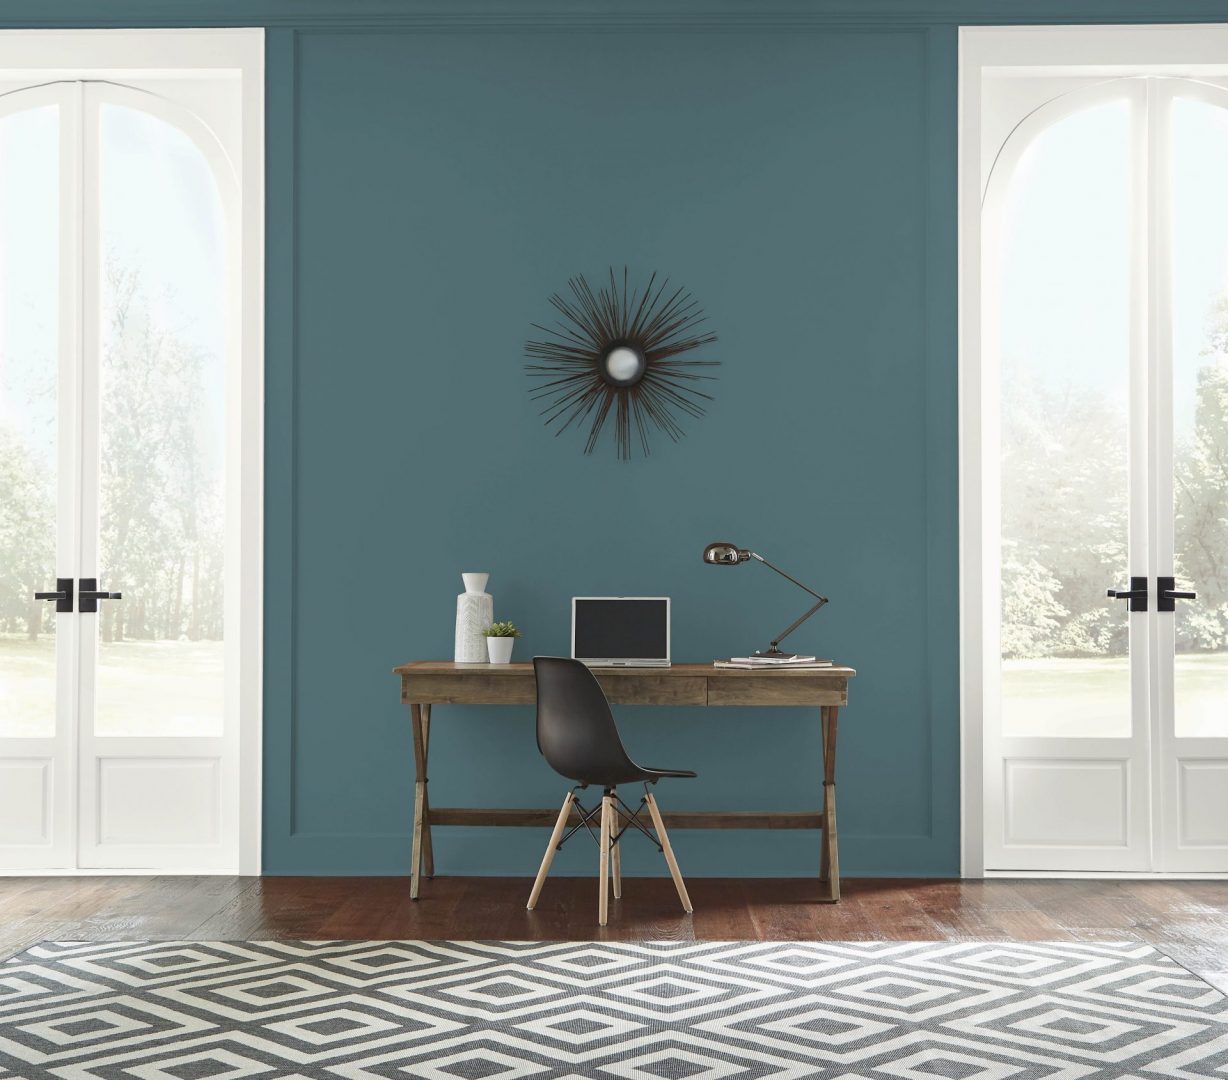 https://www.behr.com/colorfullybehr/wp-content/uploads/2023/04/BEHR_21.05_COLORTRENDS_THS_LIV_OFF_001_Sophisticatedteal_WhiperWhite-cropped-scaled.jpg